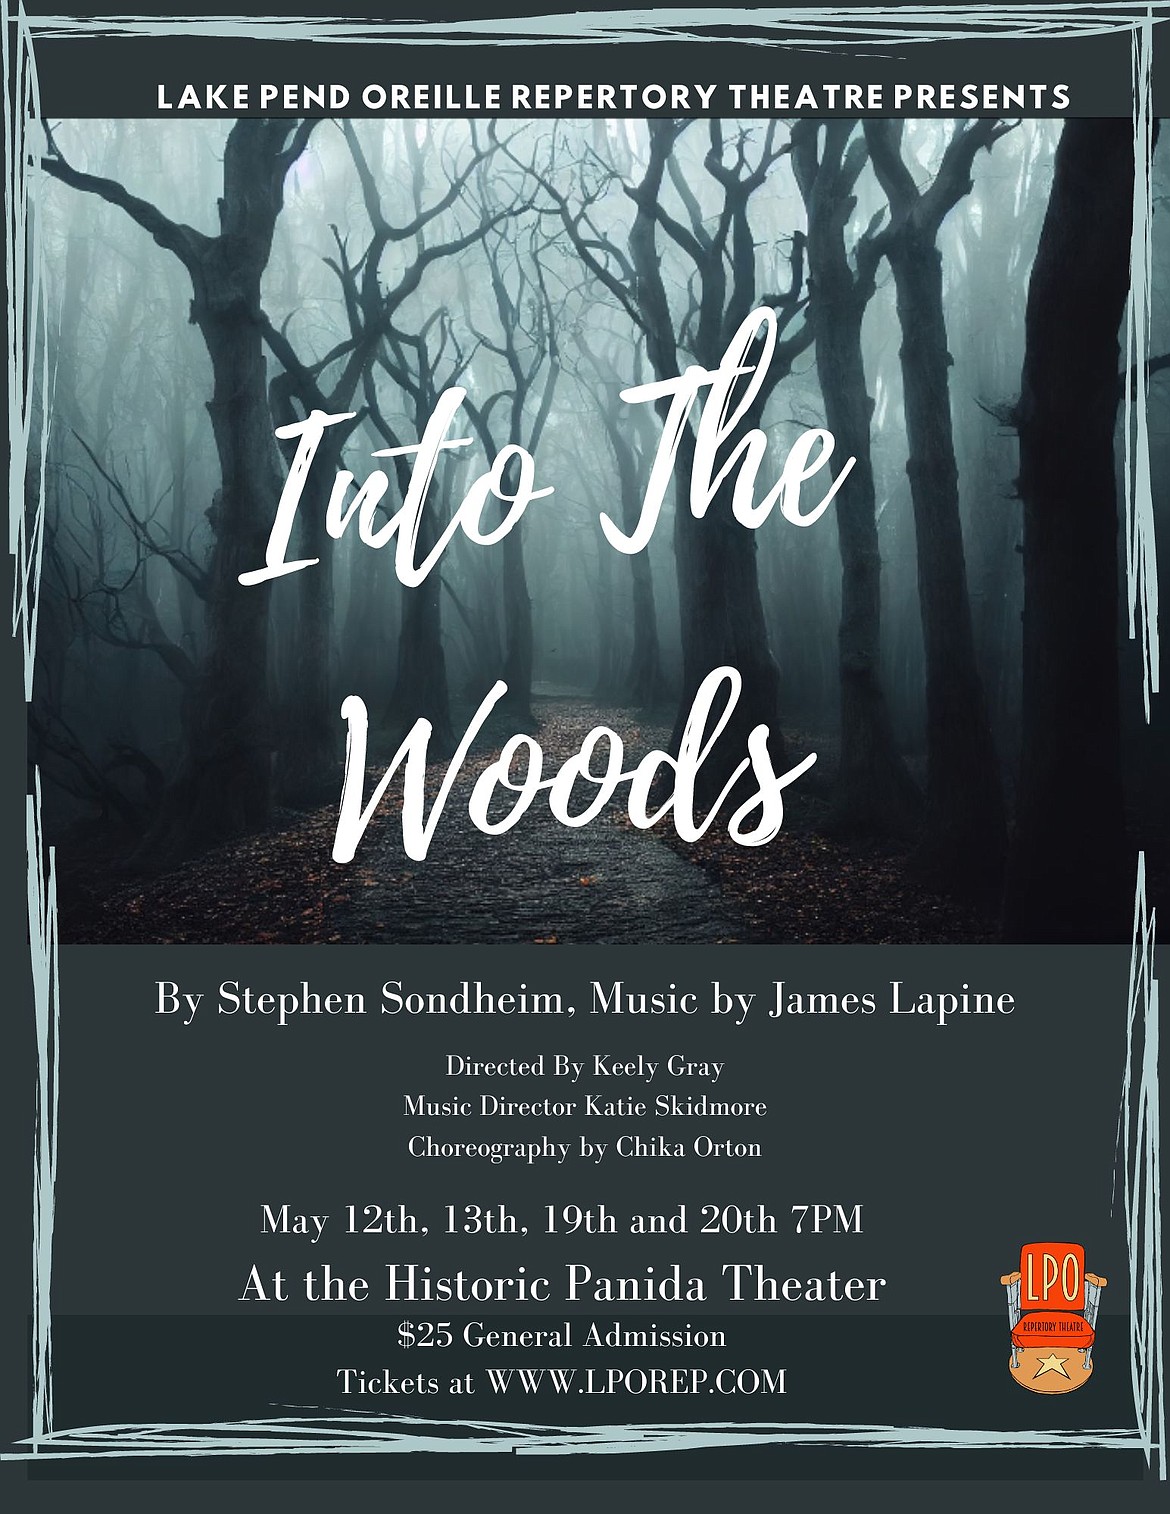 The poster for Lake Pend Oreille Repertory Theater's production of "Into the Woods". Opening night of the production is set for Friday, May 12, with showings also on May 13, 19 and 20.